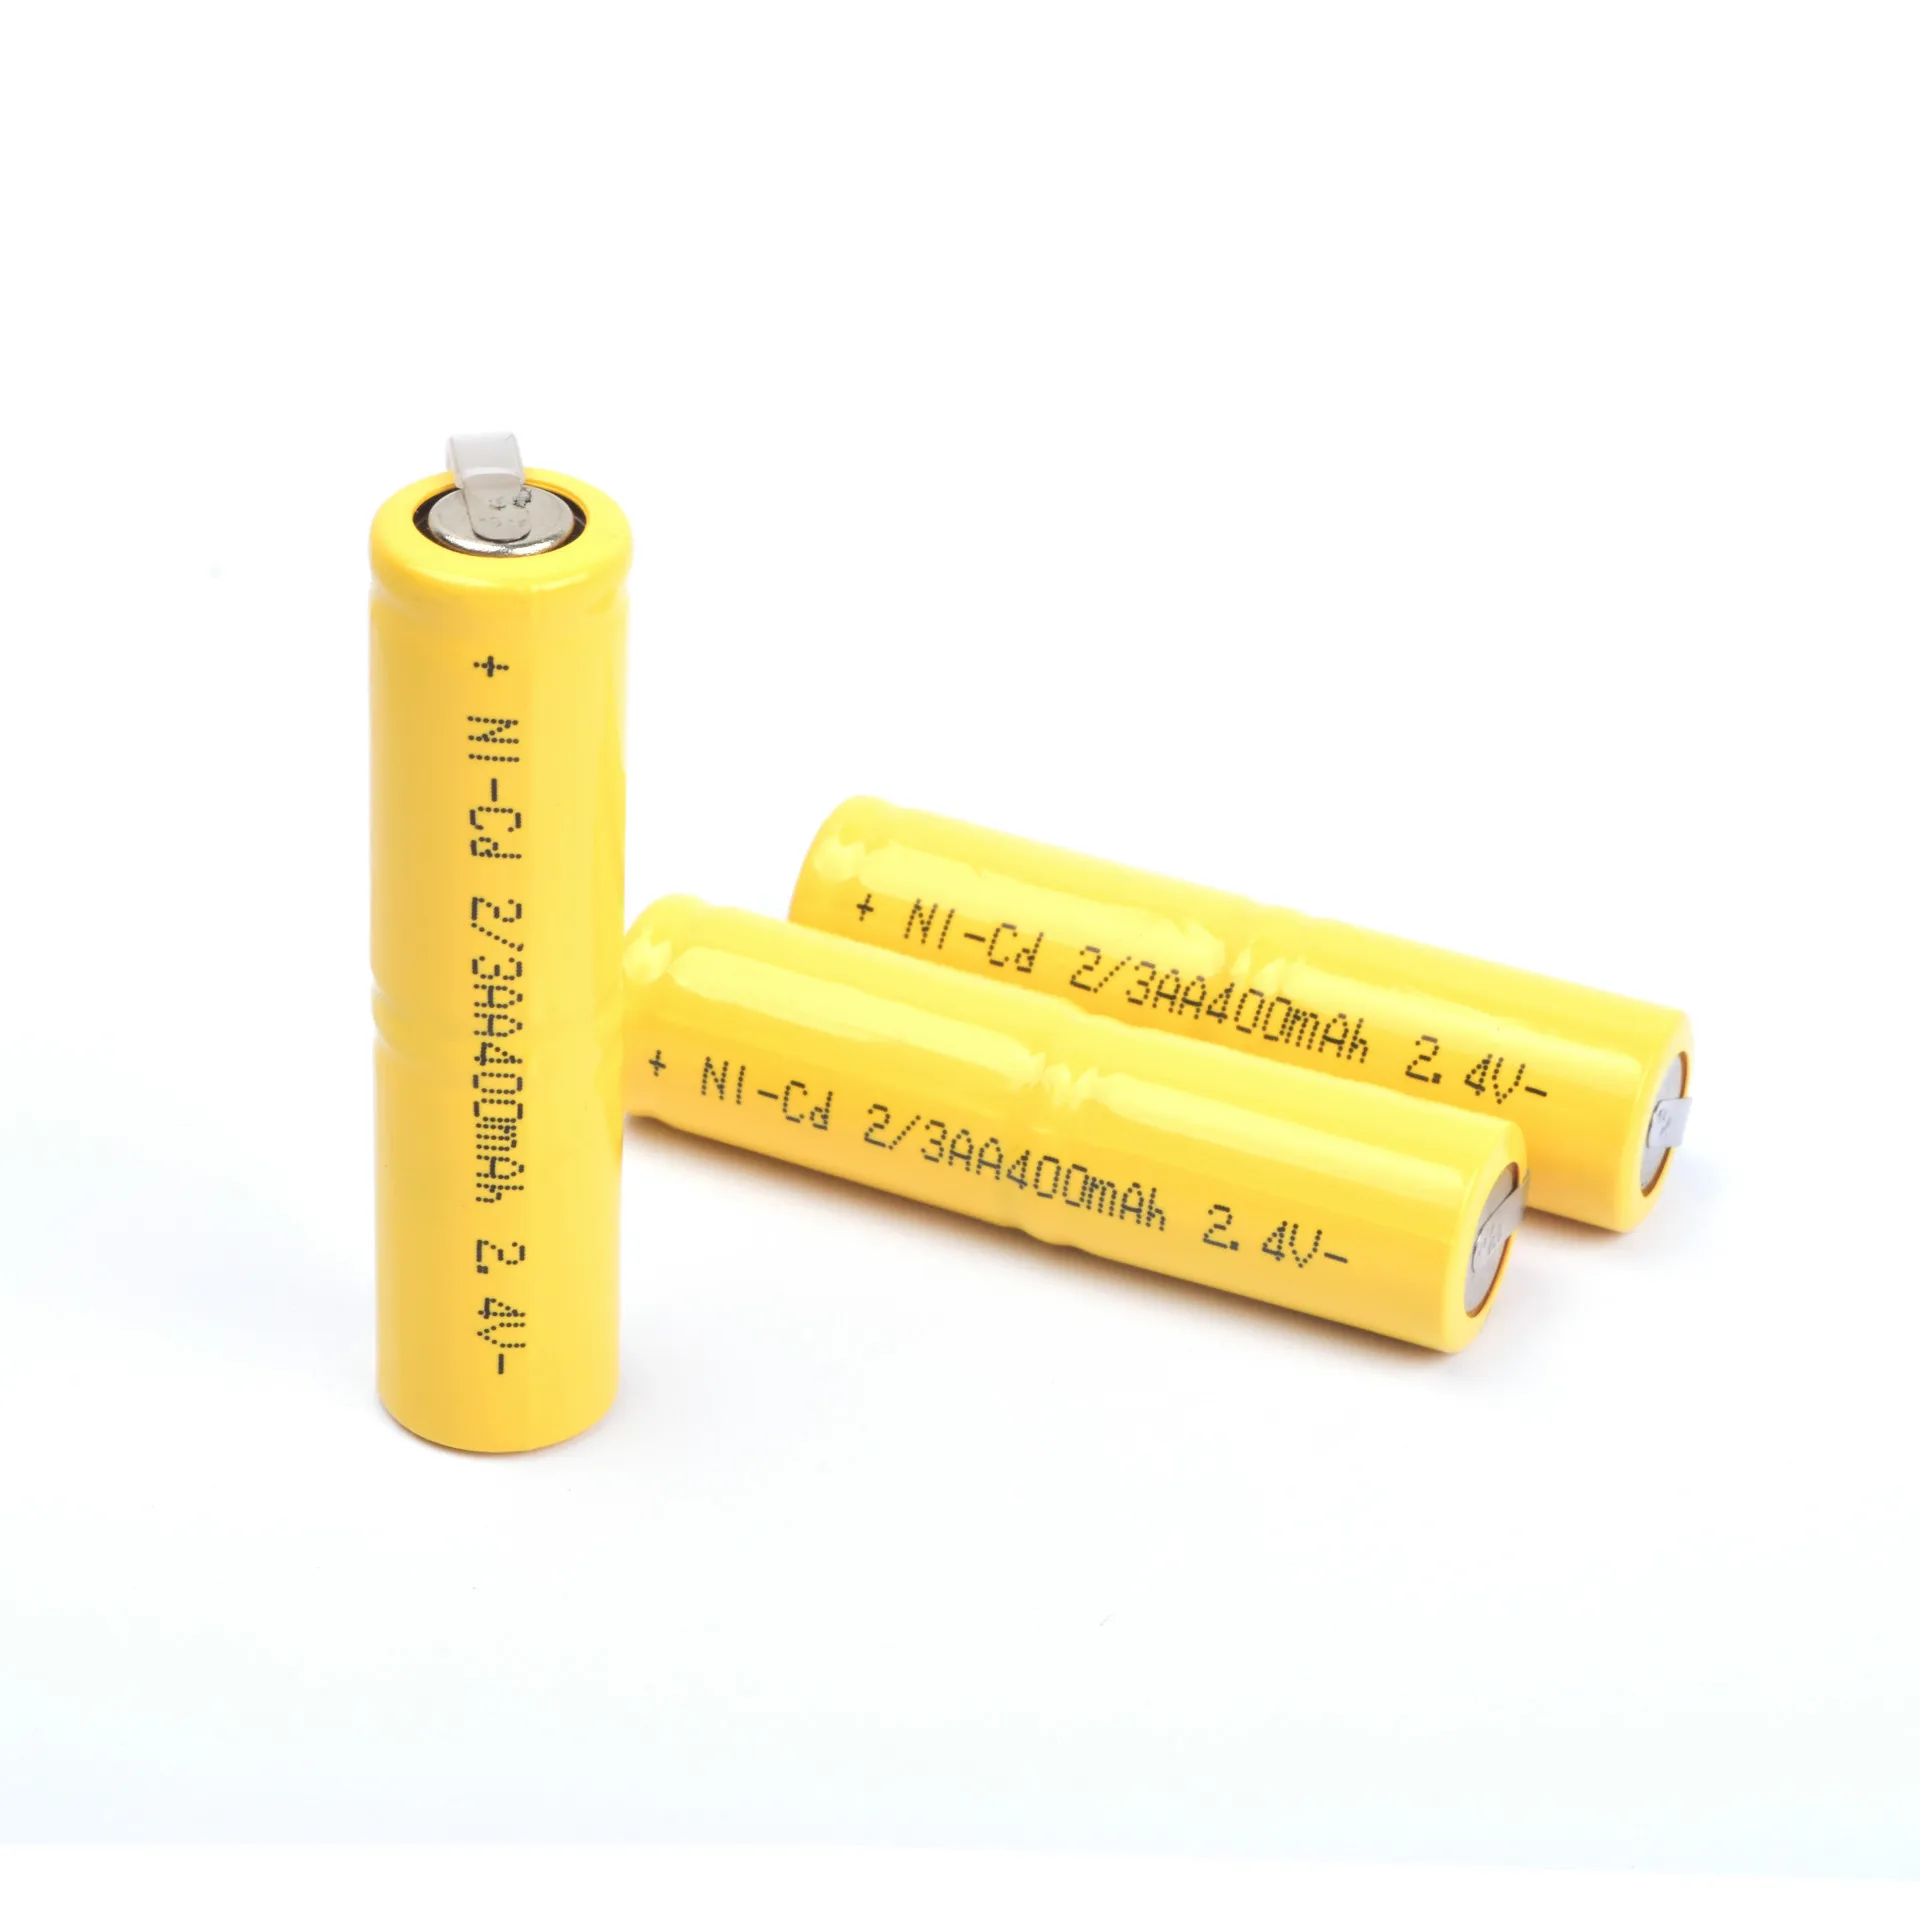 GTF 1-10pc 2/3 AA 2.4v 400mAh Battery 2/3 AA 2.4V Ni-CD Rechargeable Battery for Electric Shaver Toothbrush Razor LED Light Cell